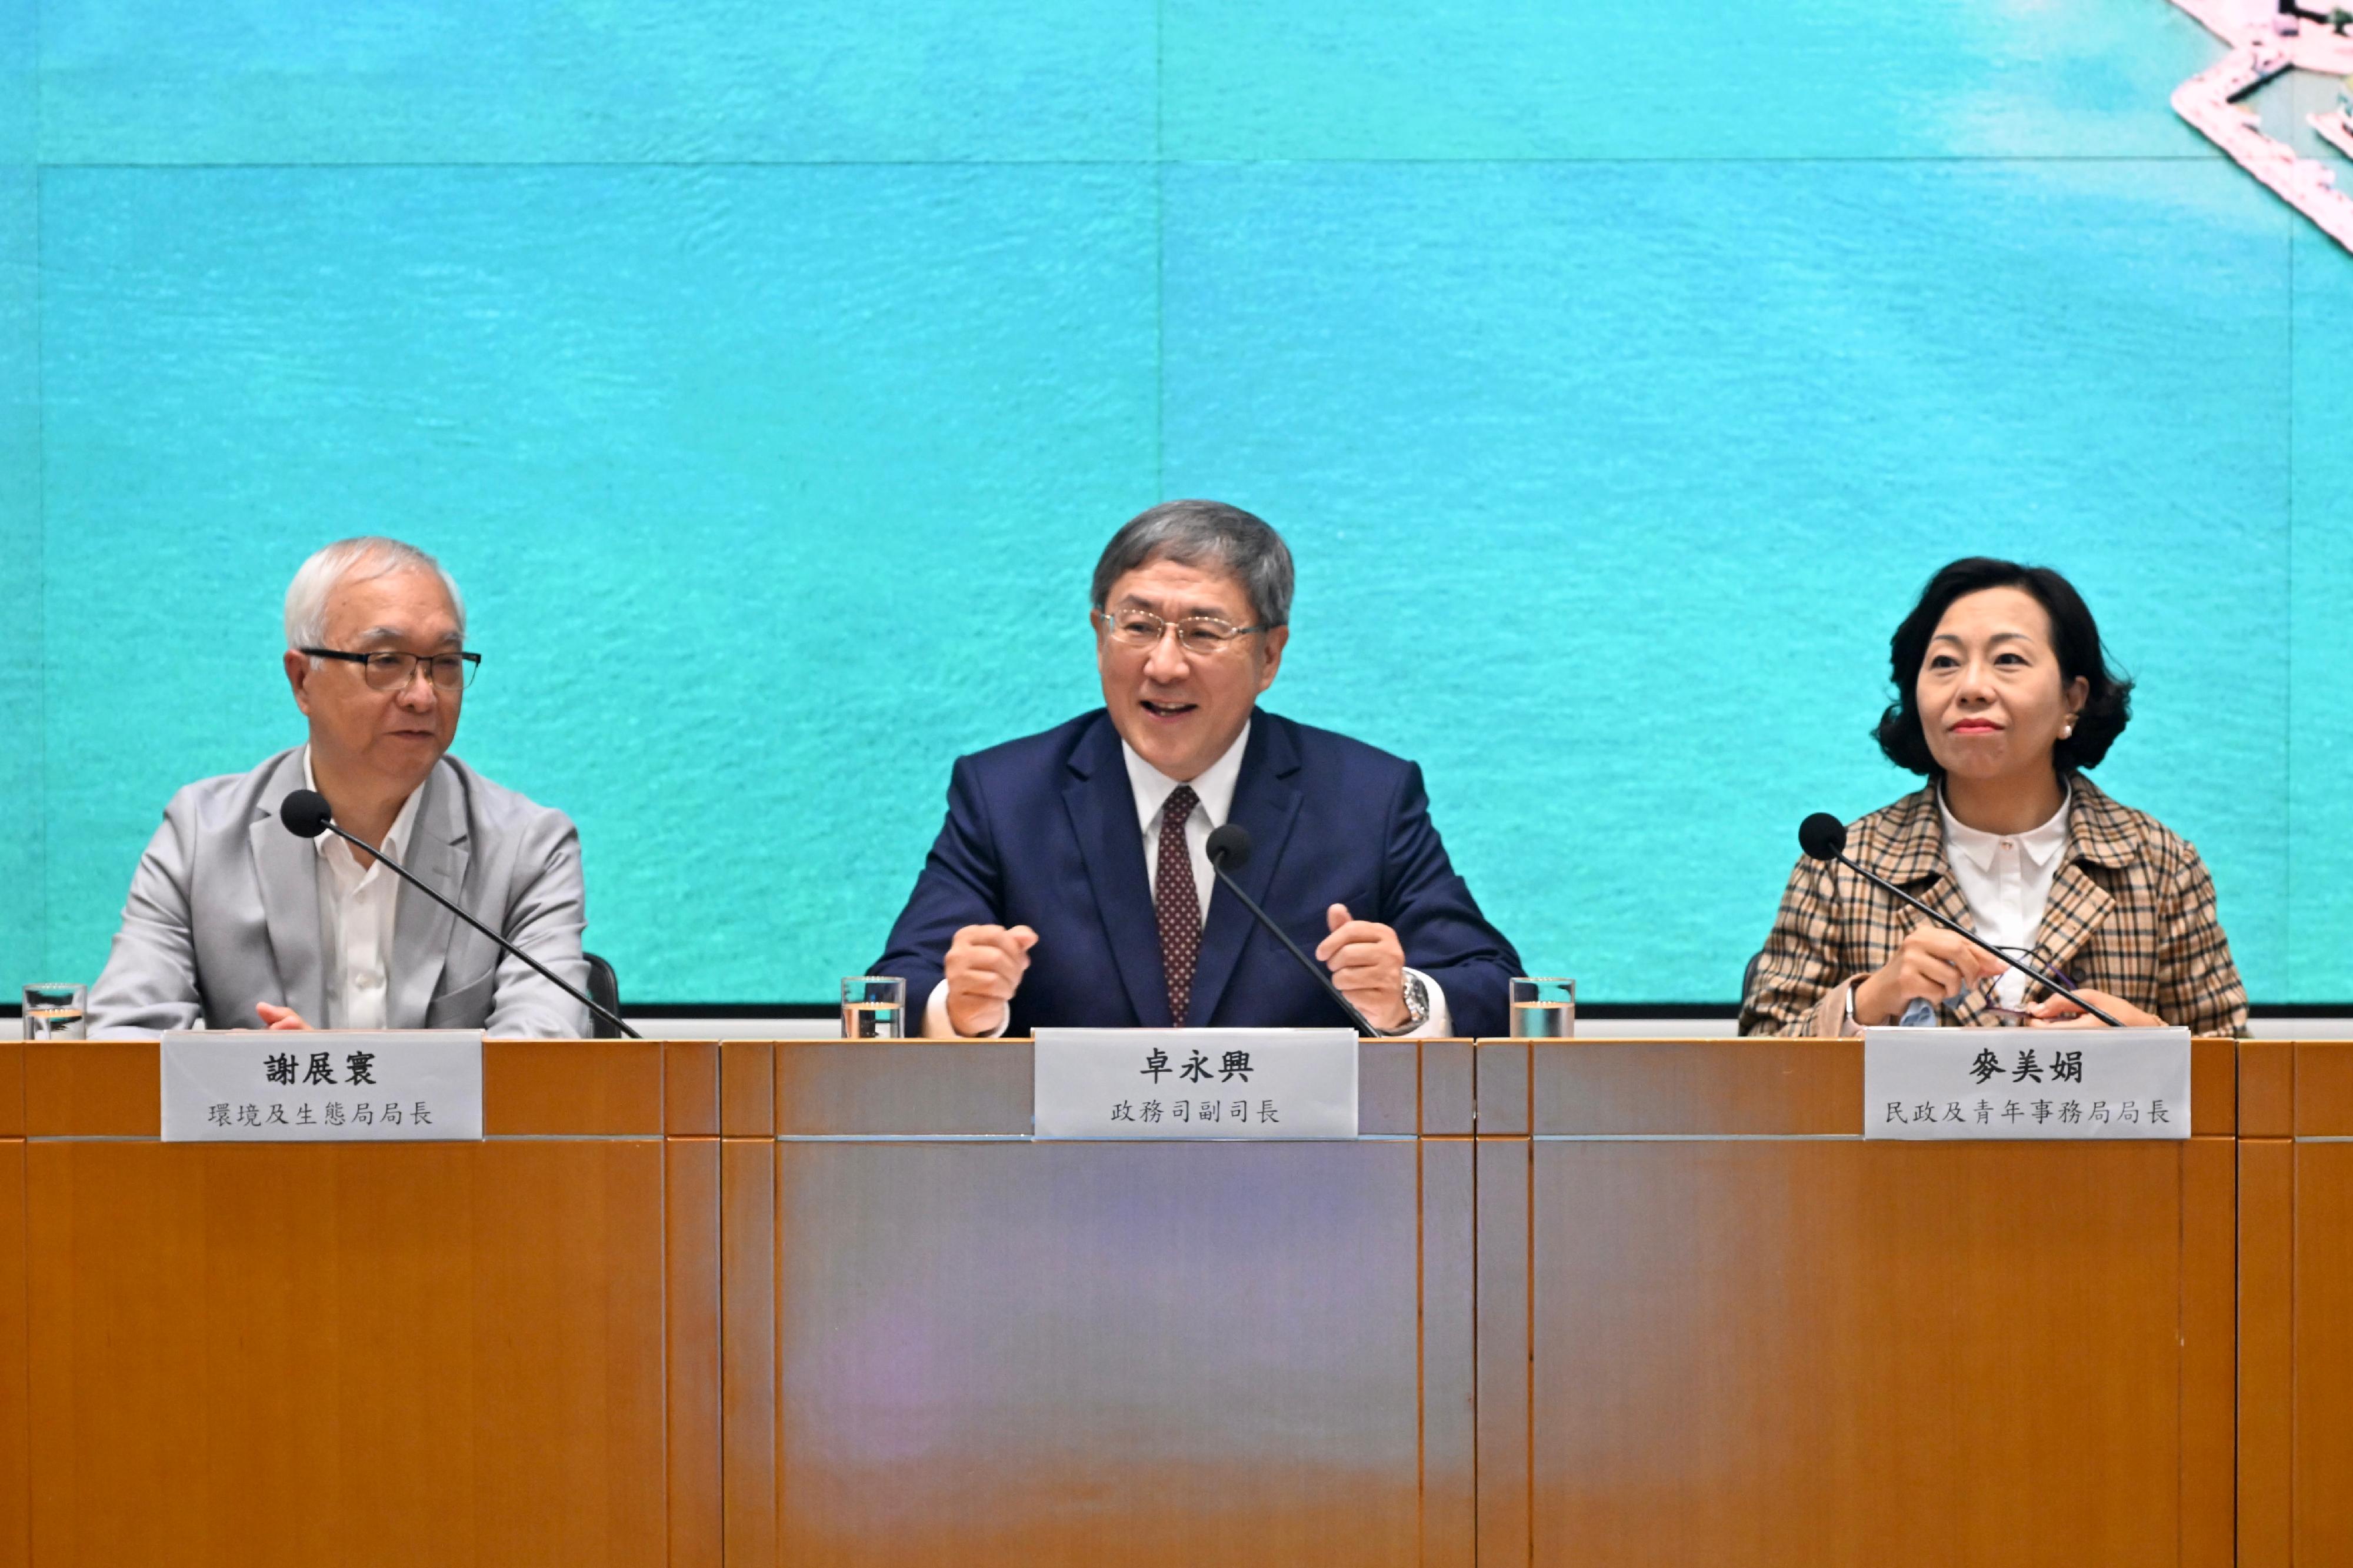 The Deputy Chief Secretary for Administration, Mr Cheuk Wing-hing (centre), together with the Secretary for Environment and Ecology, Mr Tse Chin-wan (left), and the Secretary for Home and Youth Affairs, Miss Alice Mak (right), today (April 9) held a briefing session on the Municipal Solid Waste Charging Demonstration Scheme for District Council members to introduce the background, objectives and details of the survey.